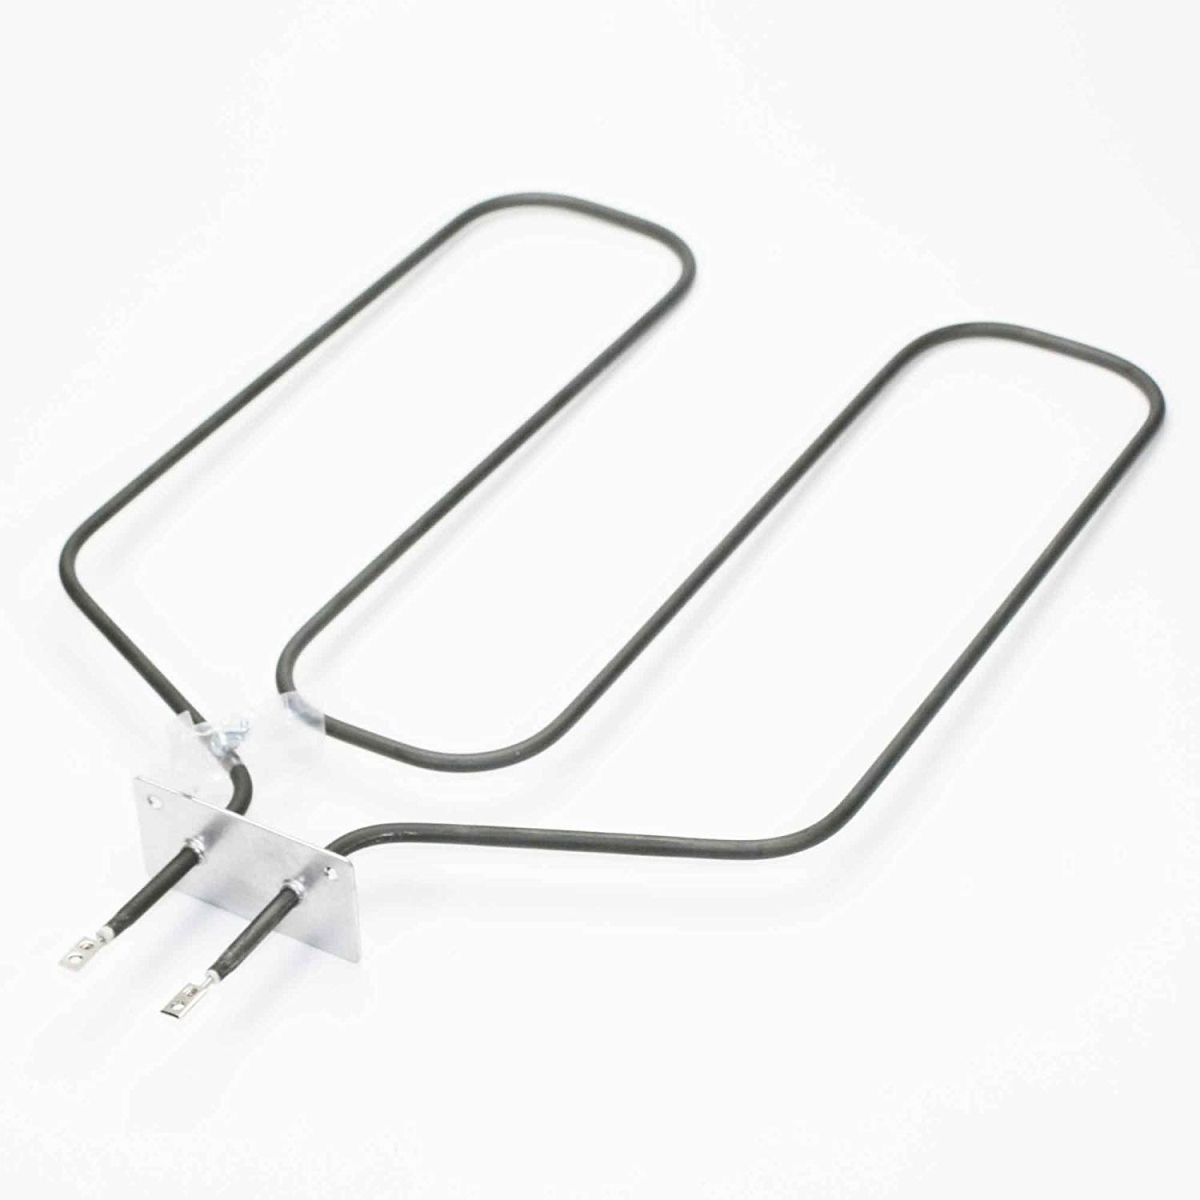 Picture of Aftermarket Appliance APLWB44X173 Range Bake & Broil Element for General Electric